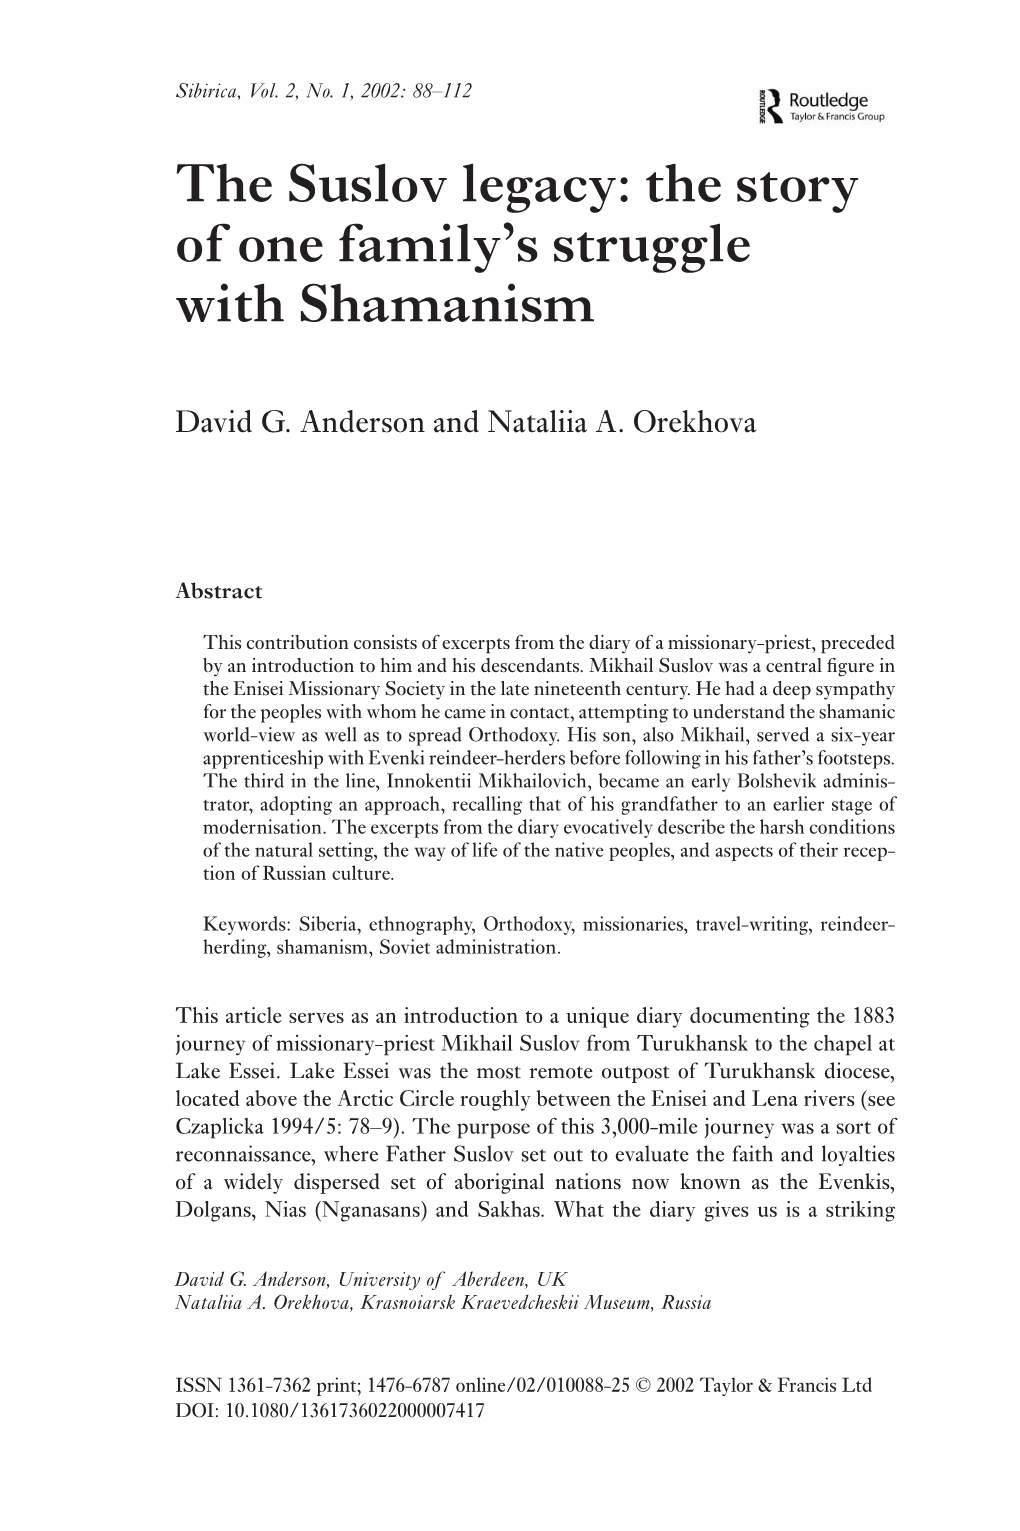 The Suslov Legacy: the Story of One Family's Struggle with Shamanism